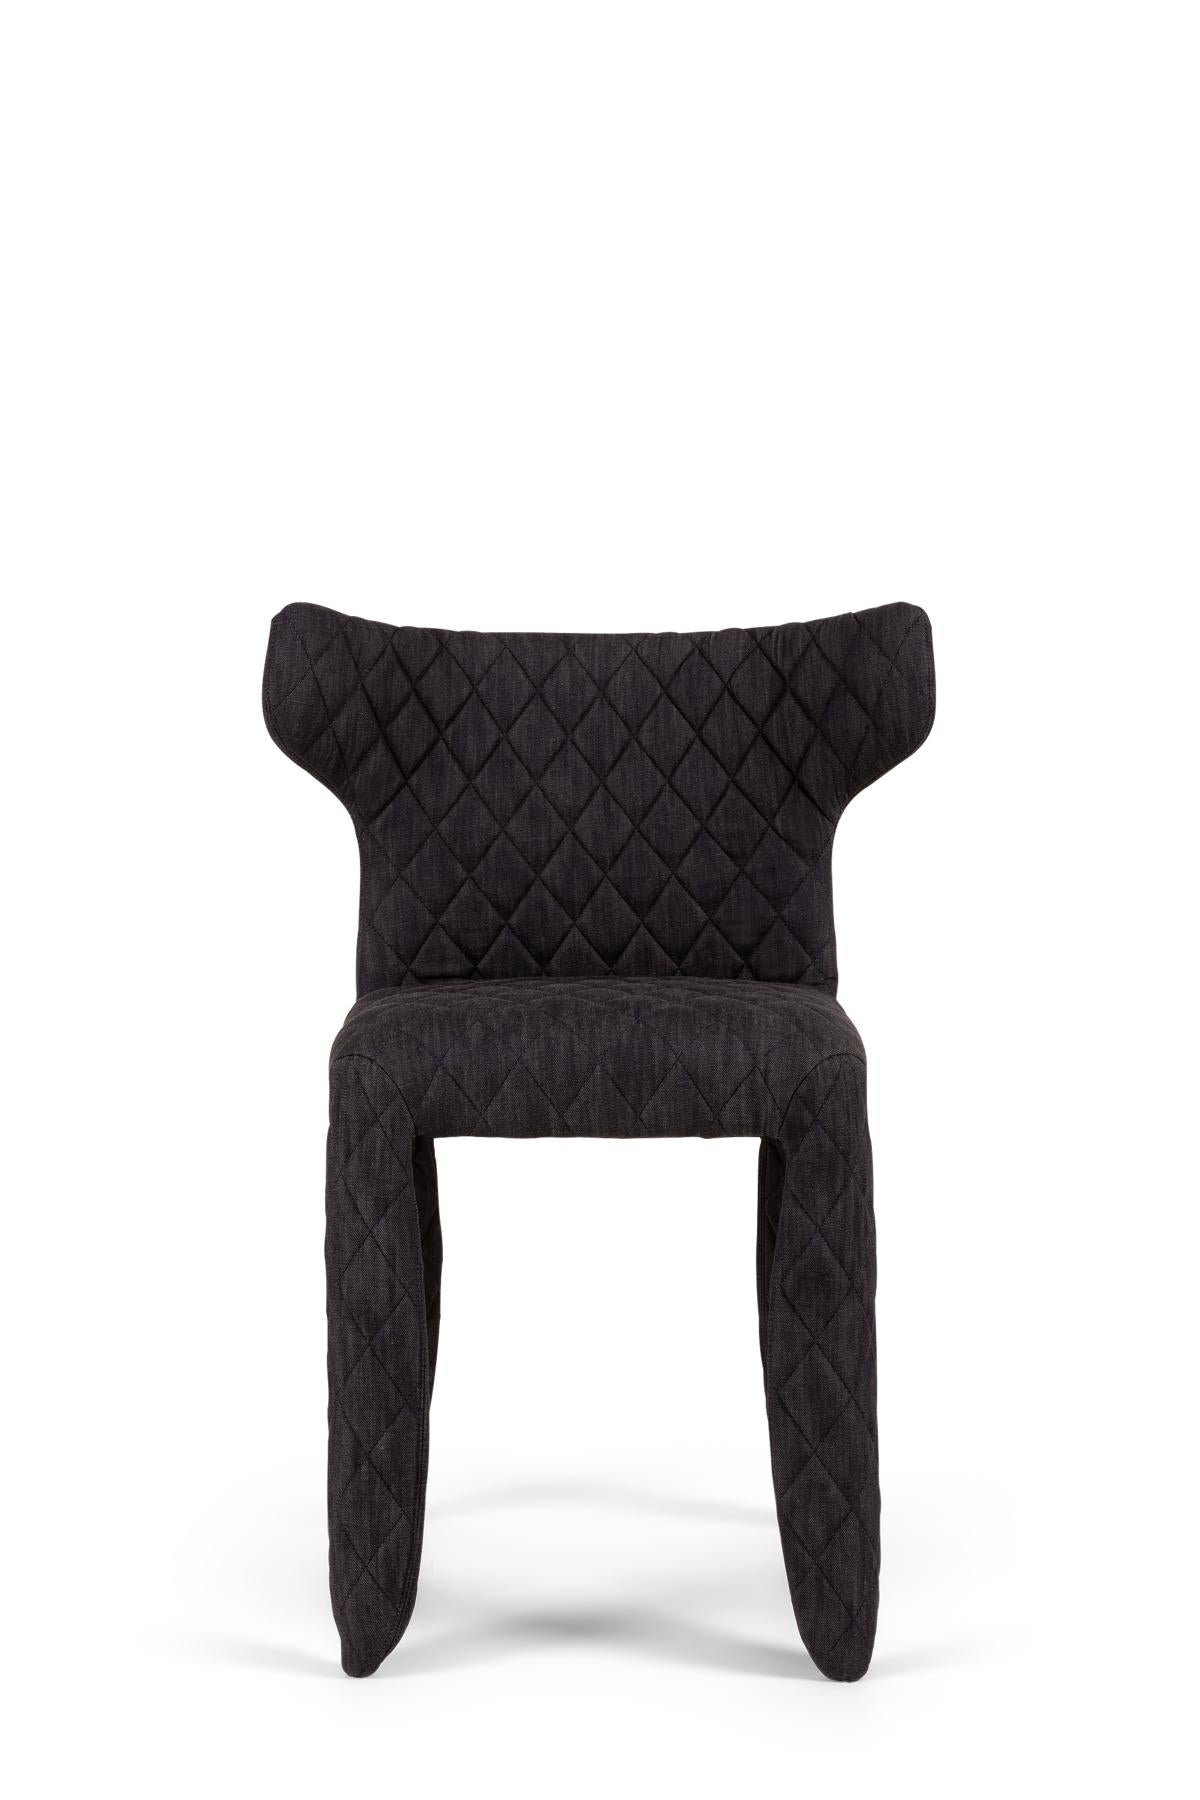 Modern Moooi Monster Diamond Chair with Arms in Denim Midnight Black Upholstery For Sale